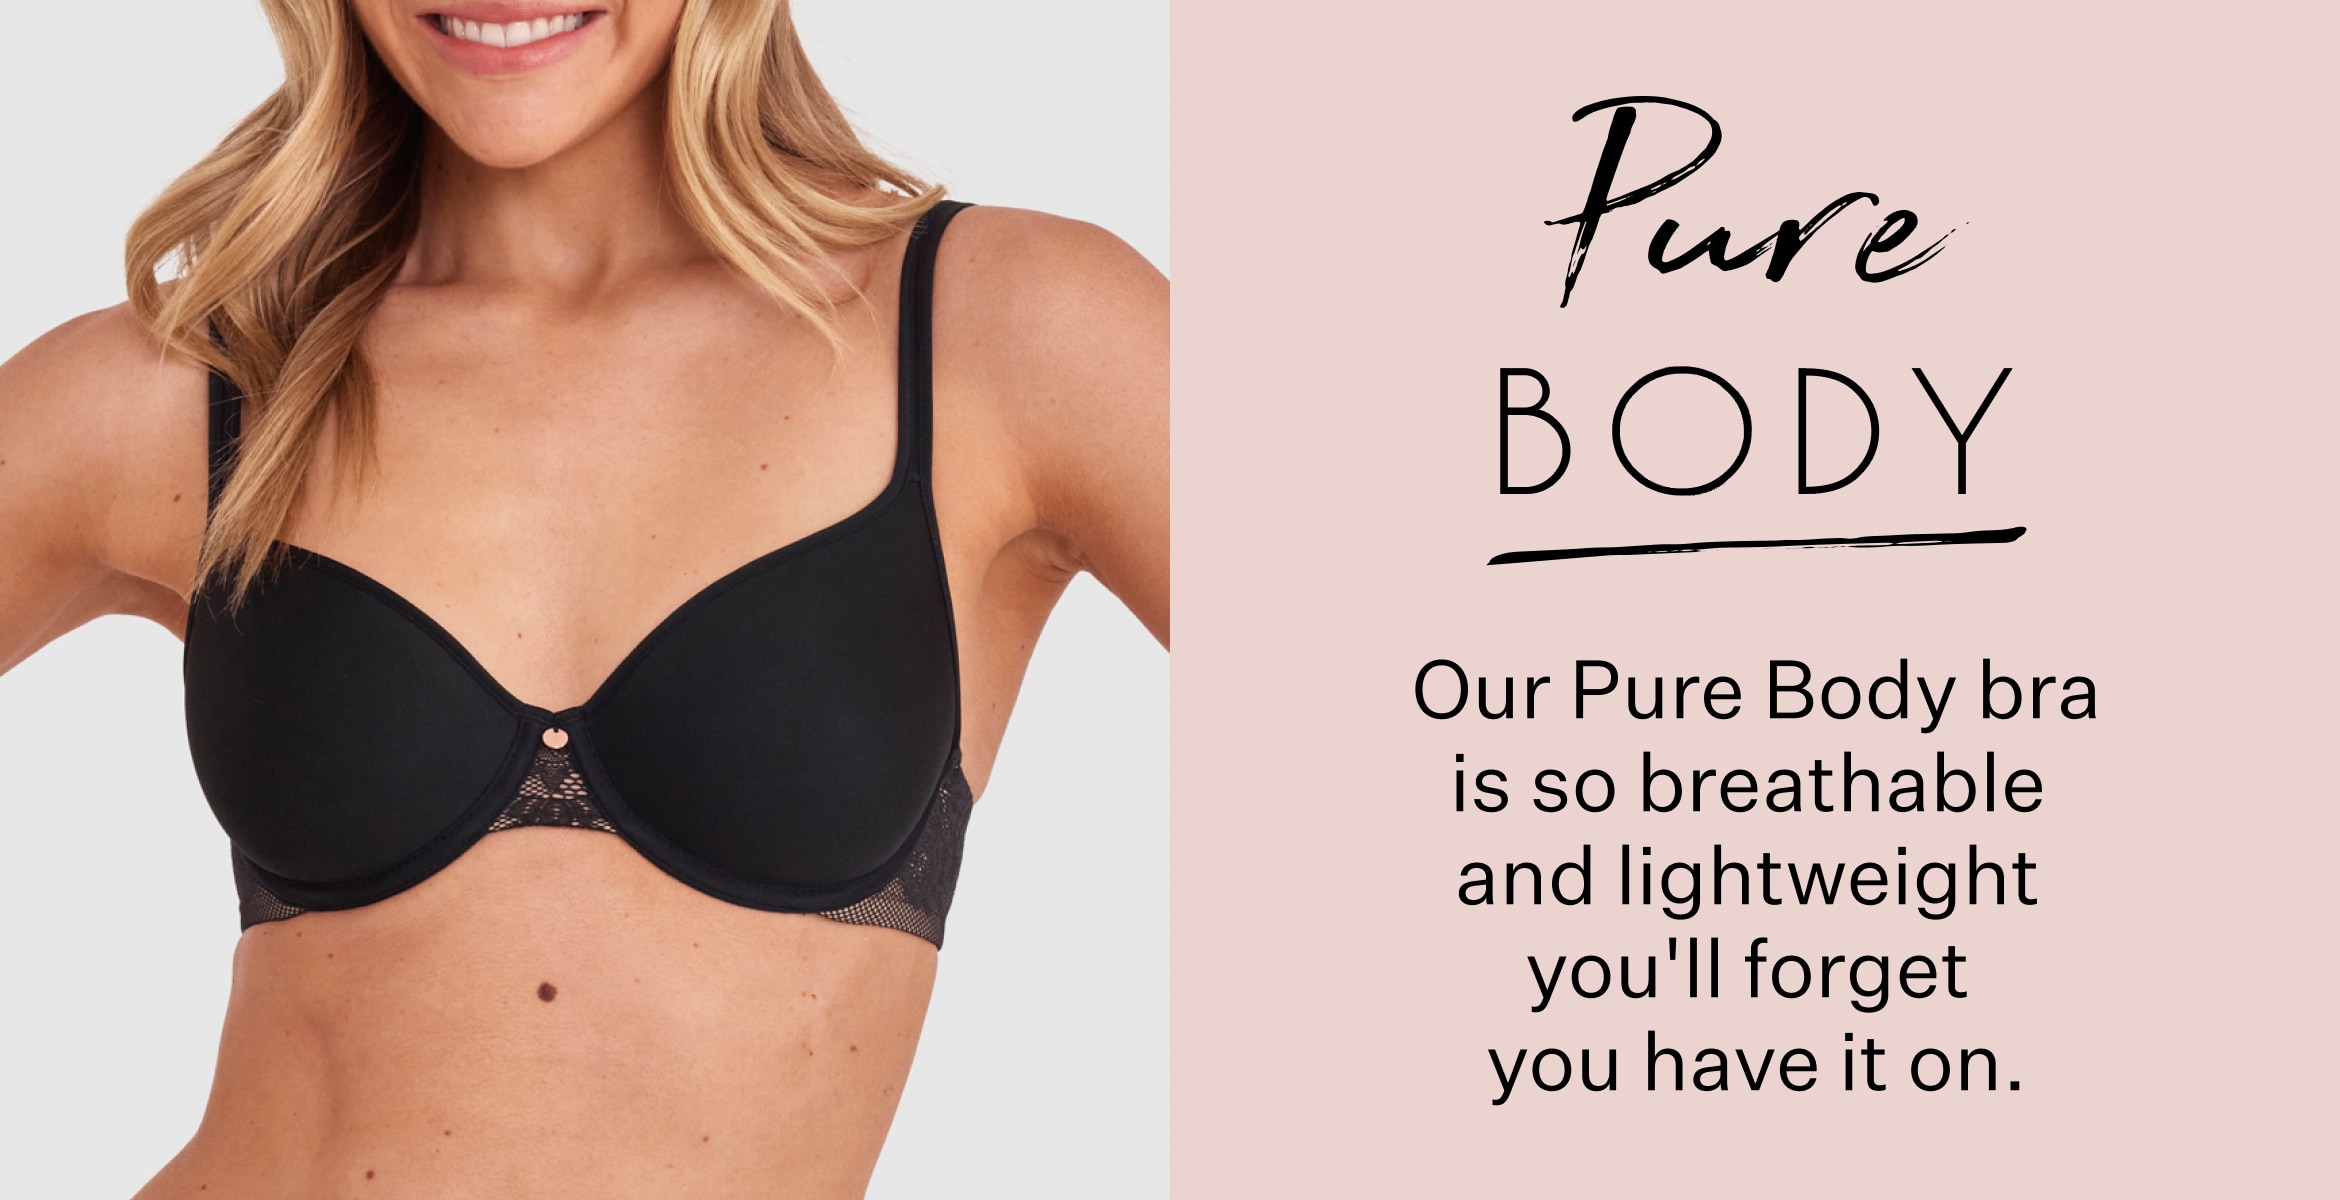 Pure Body. Indulge in the wonderful weightlessness of our Pure Body bra. Next-level comfort awaits.